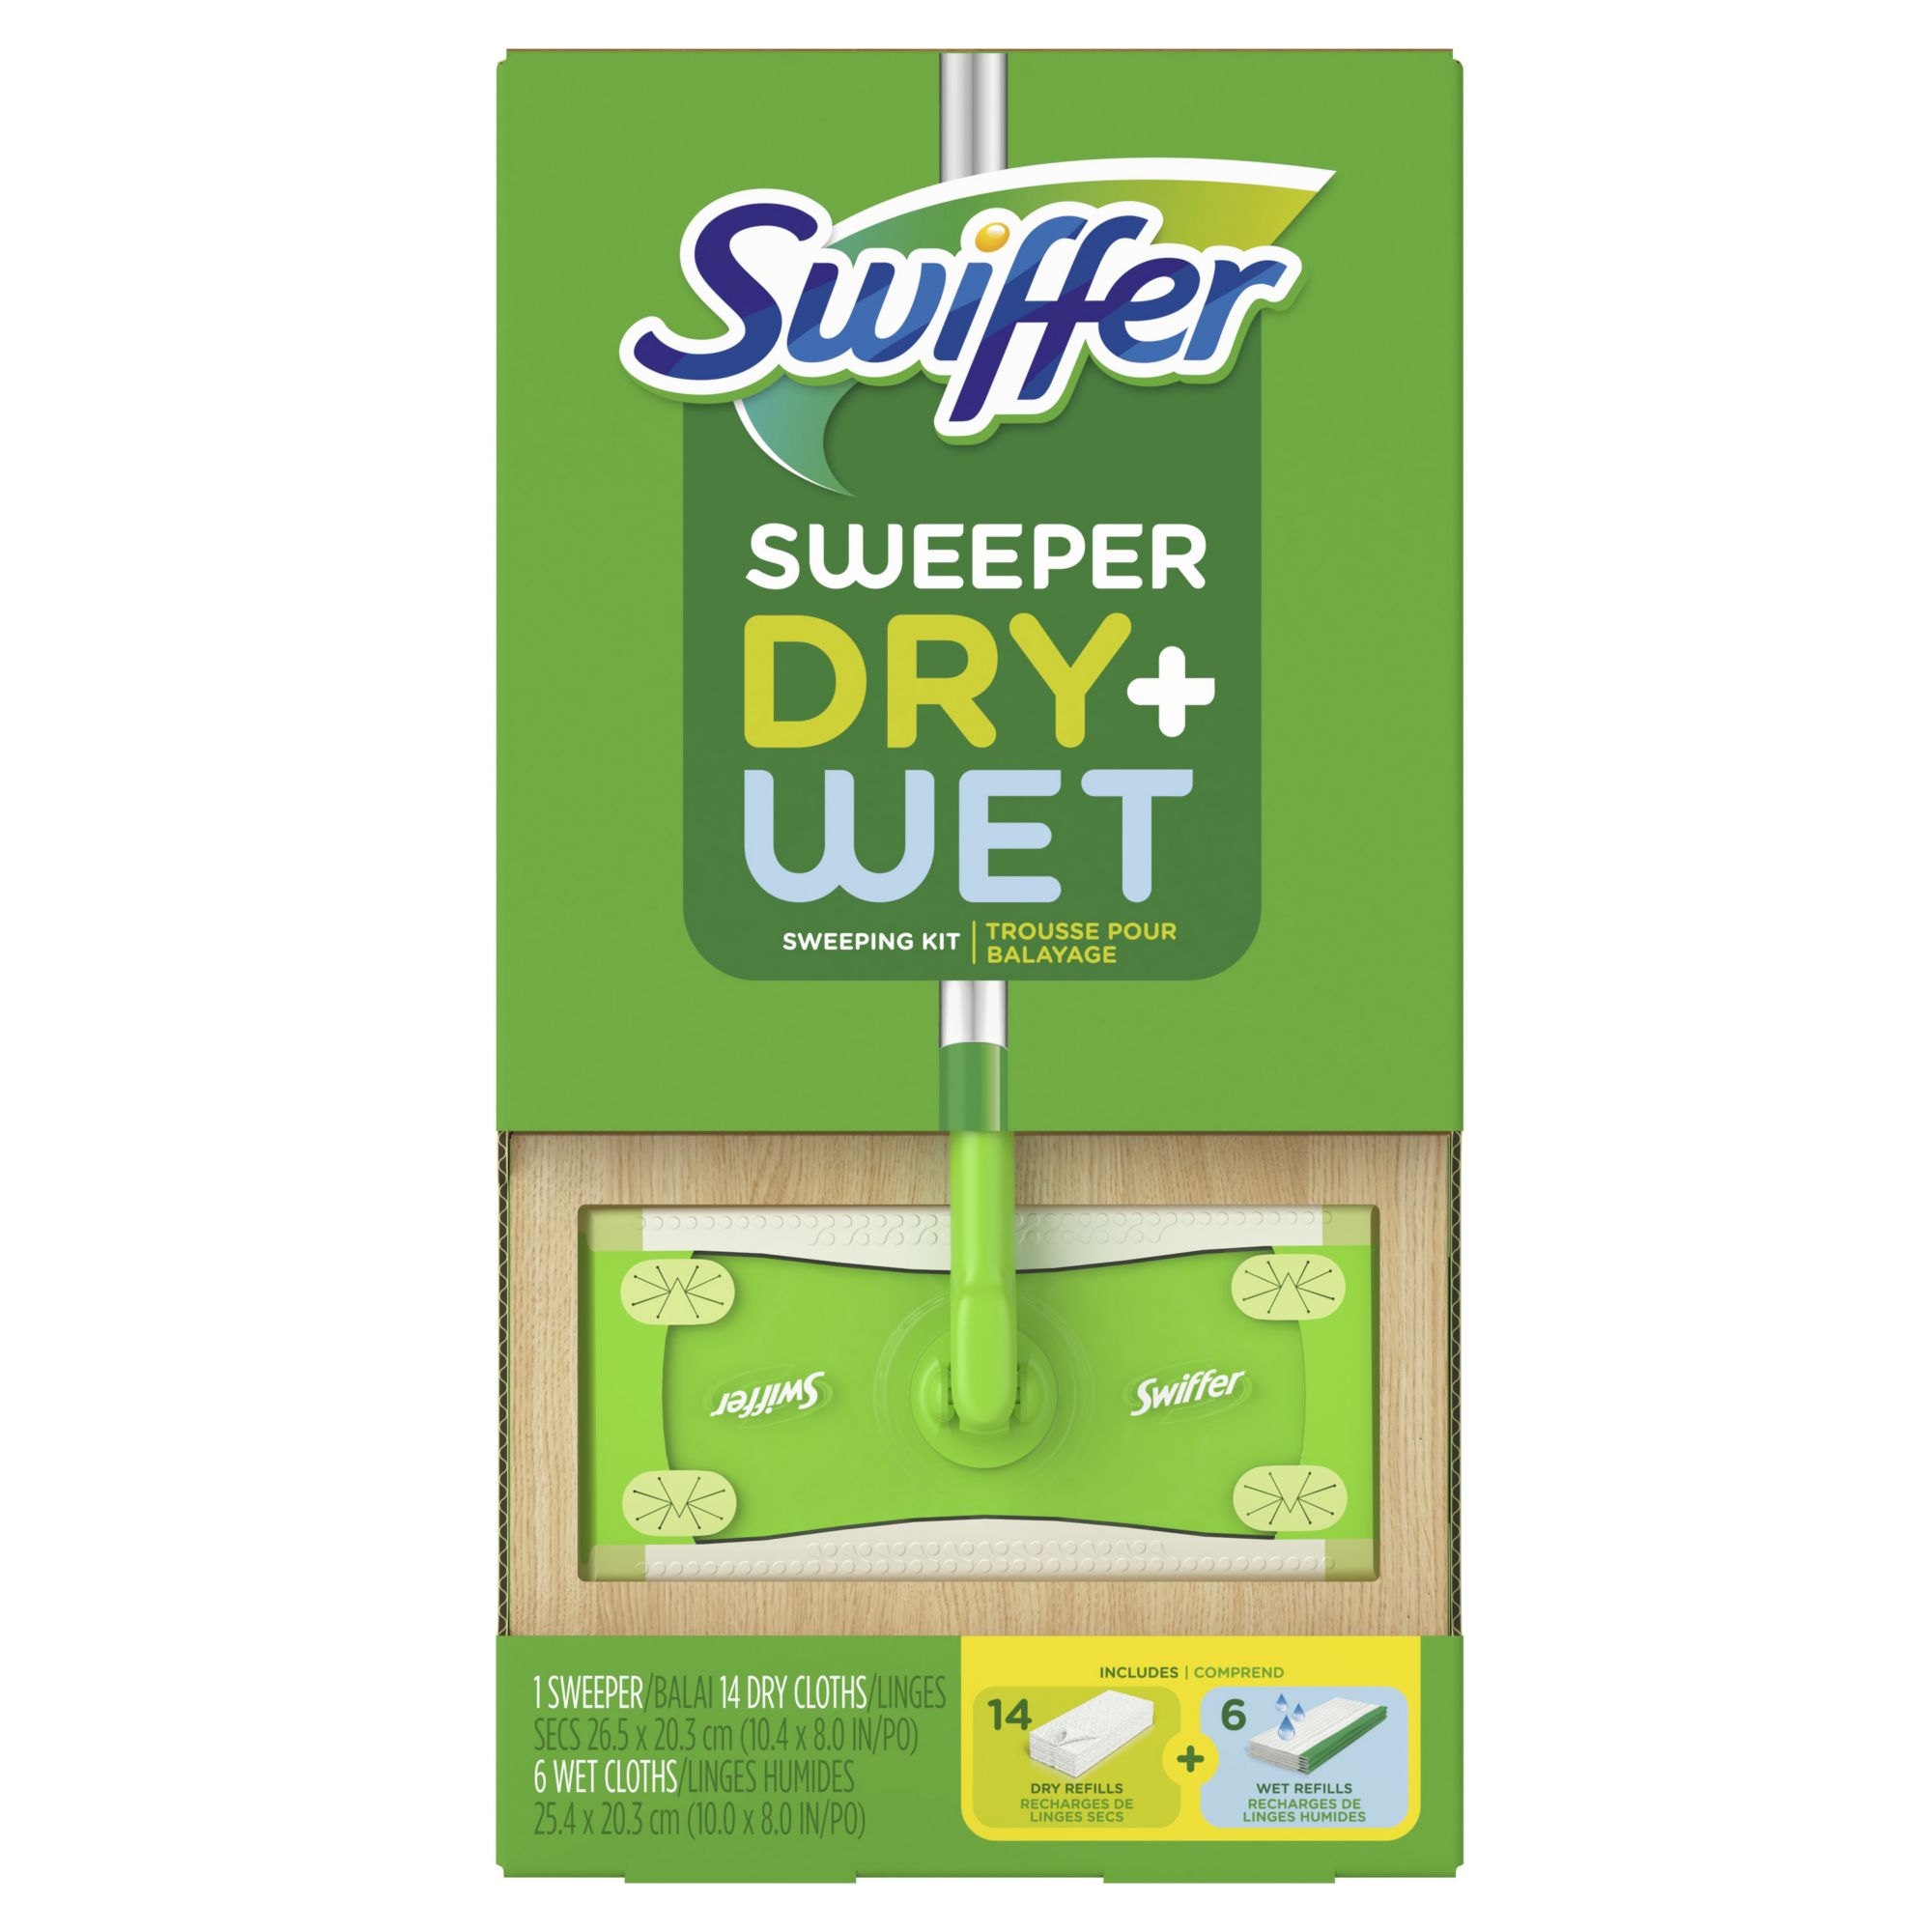 Swiffer Sweeper Wet Mopping Cloth Refills, Lavender Scent, (64